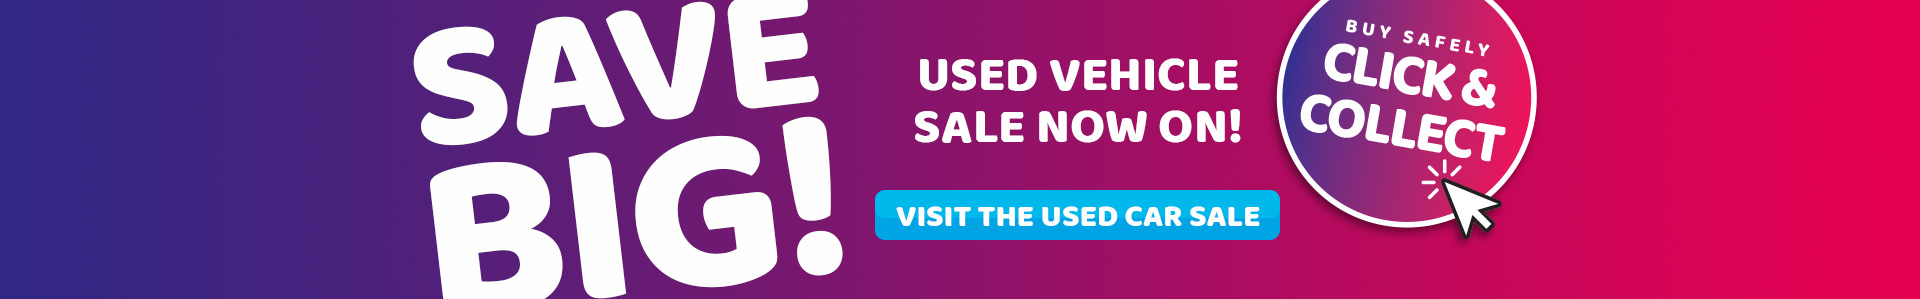 Save Big! Used Car sale now on!